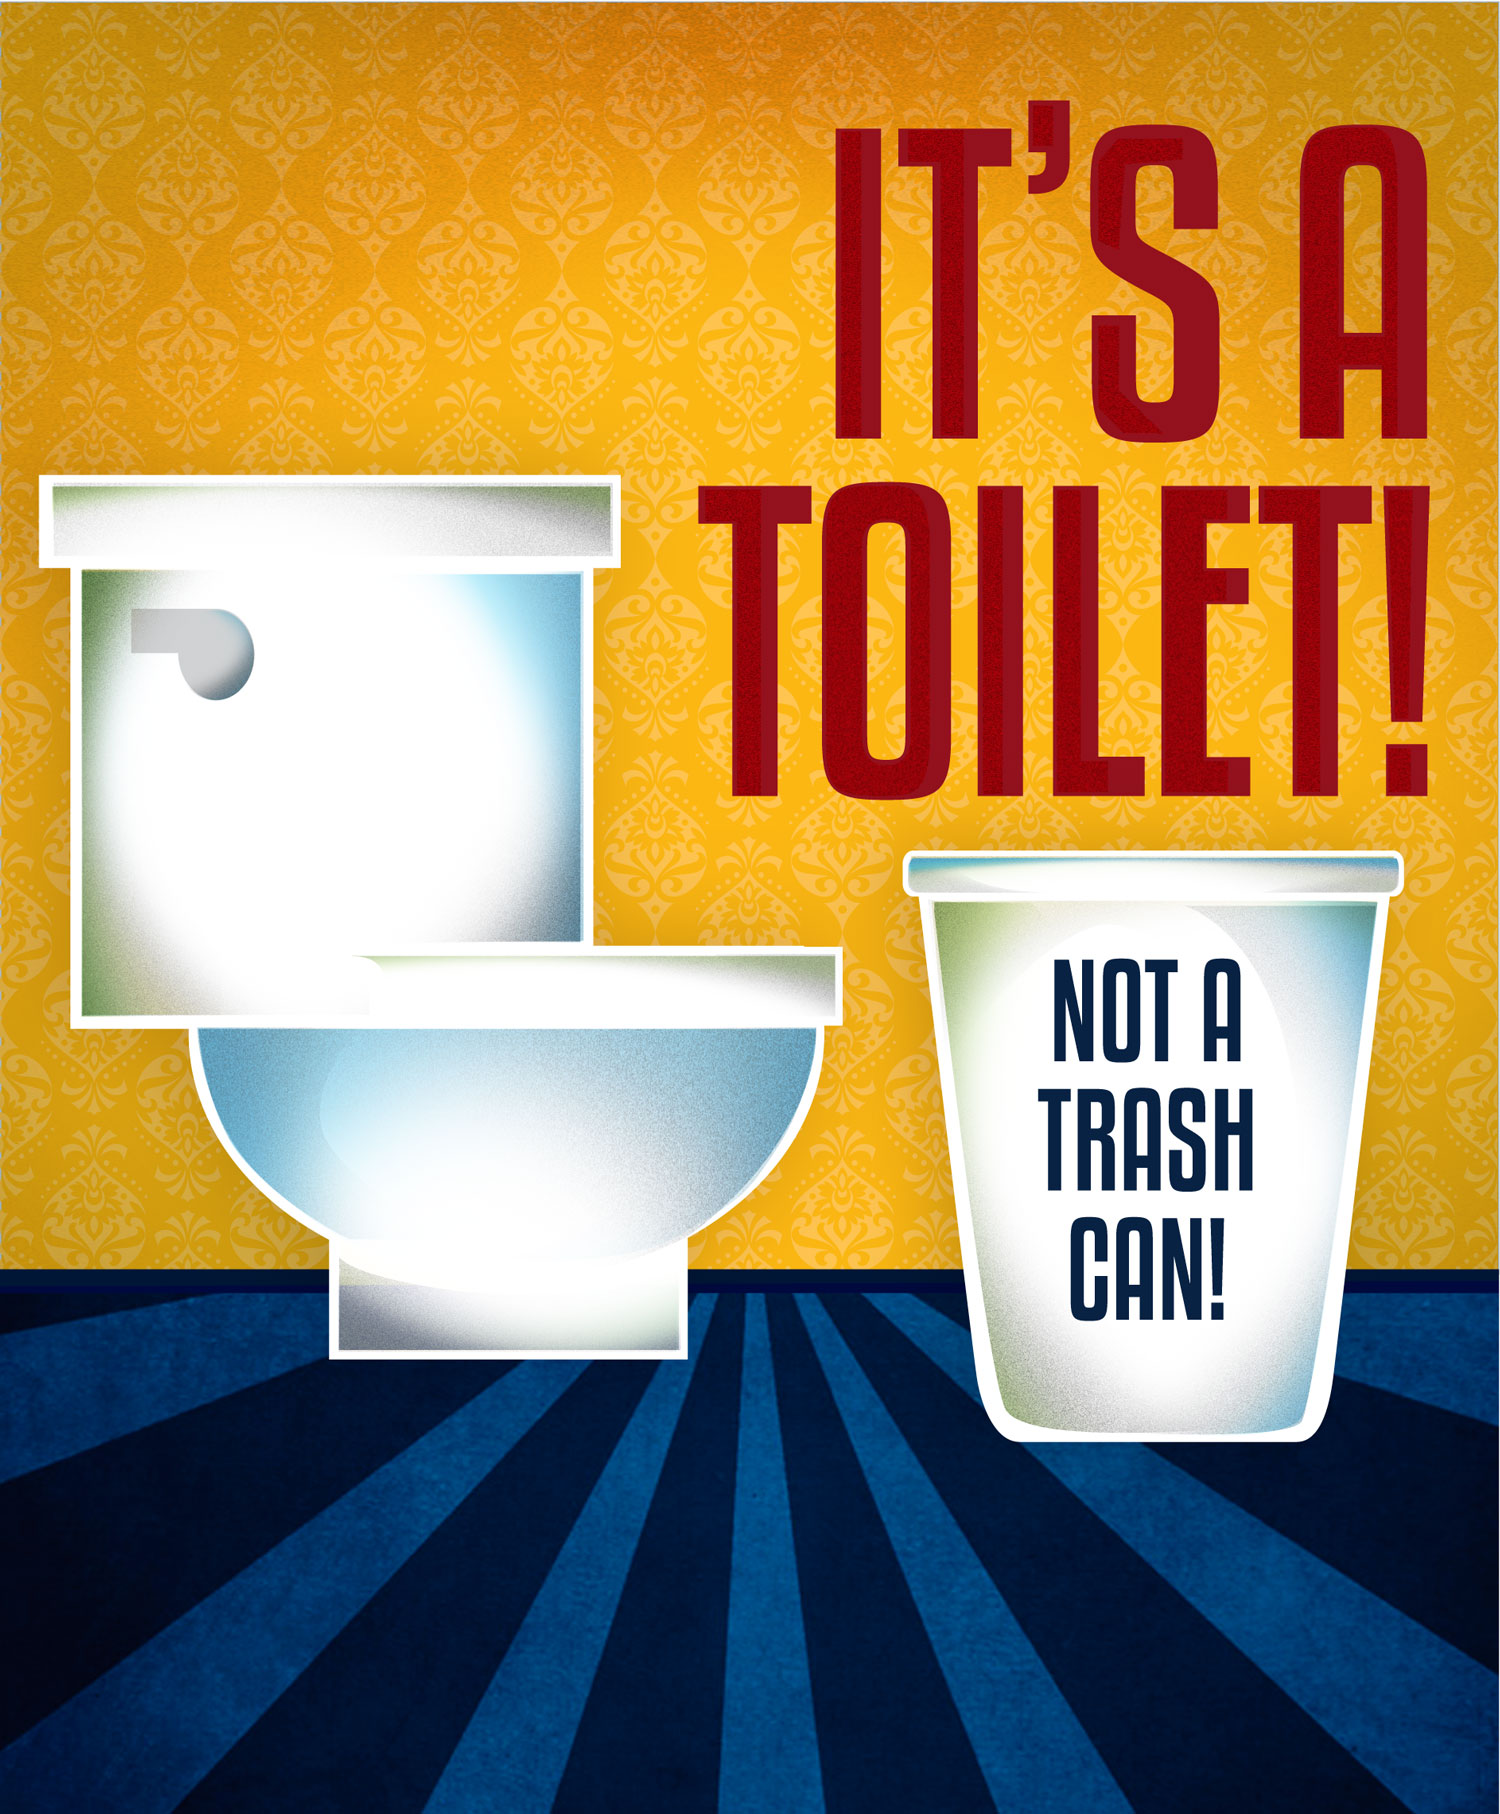 MWRA - It's a Toilet, Not a Trash Can! 